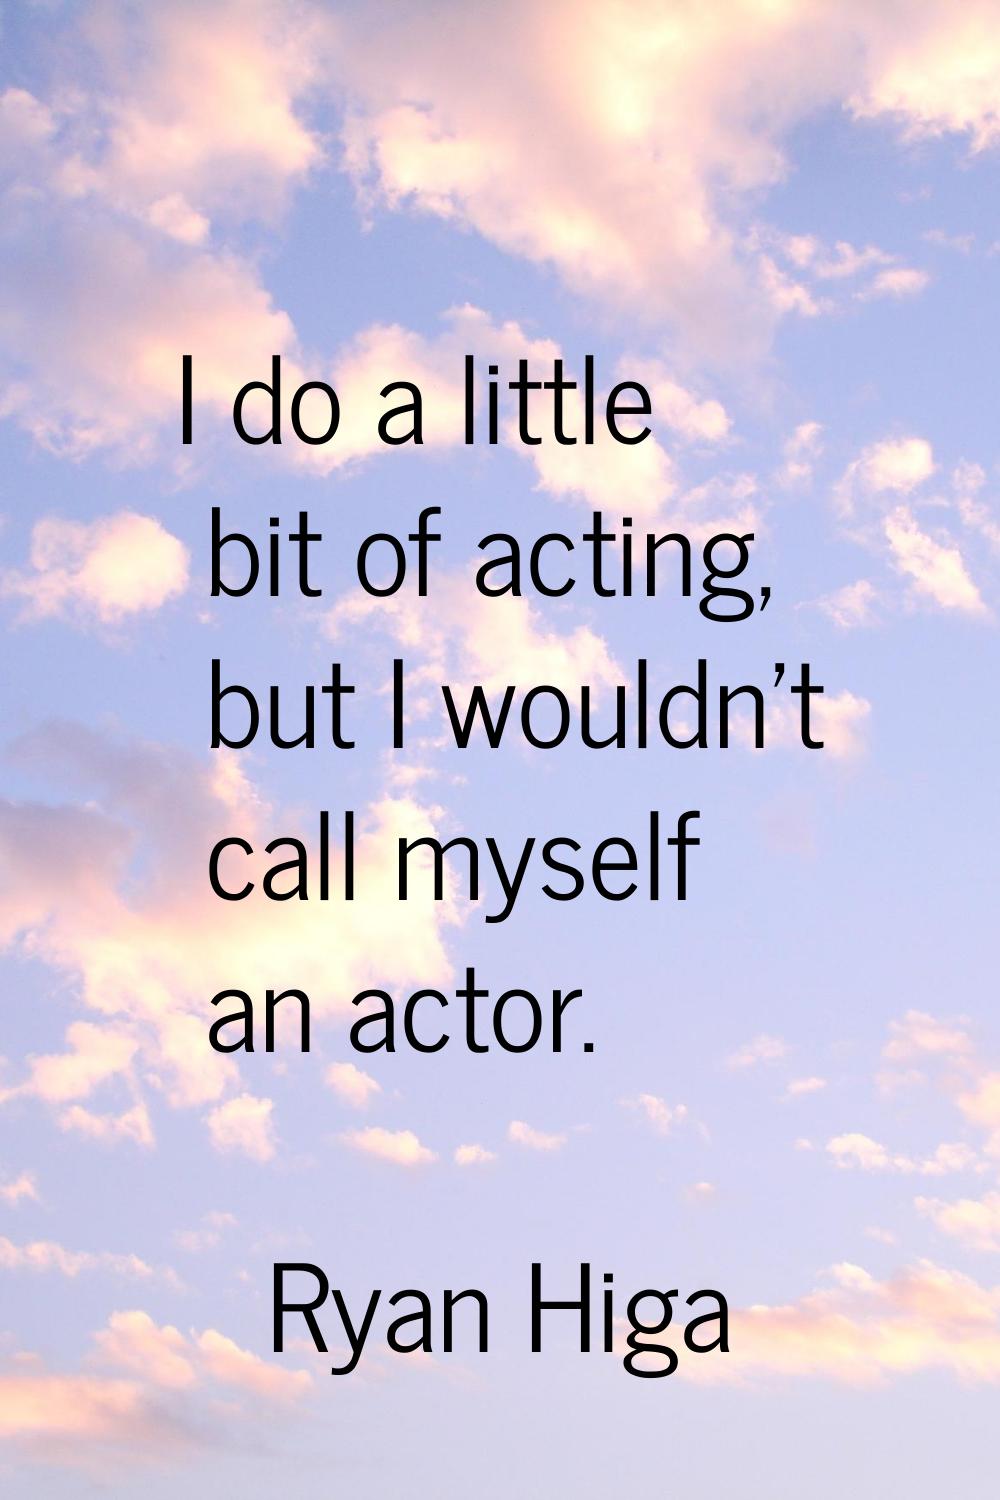 I do a little bit of acting, but I wouldn't call myself an actor.